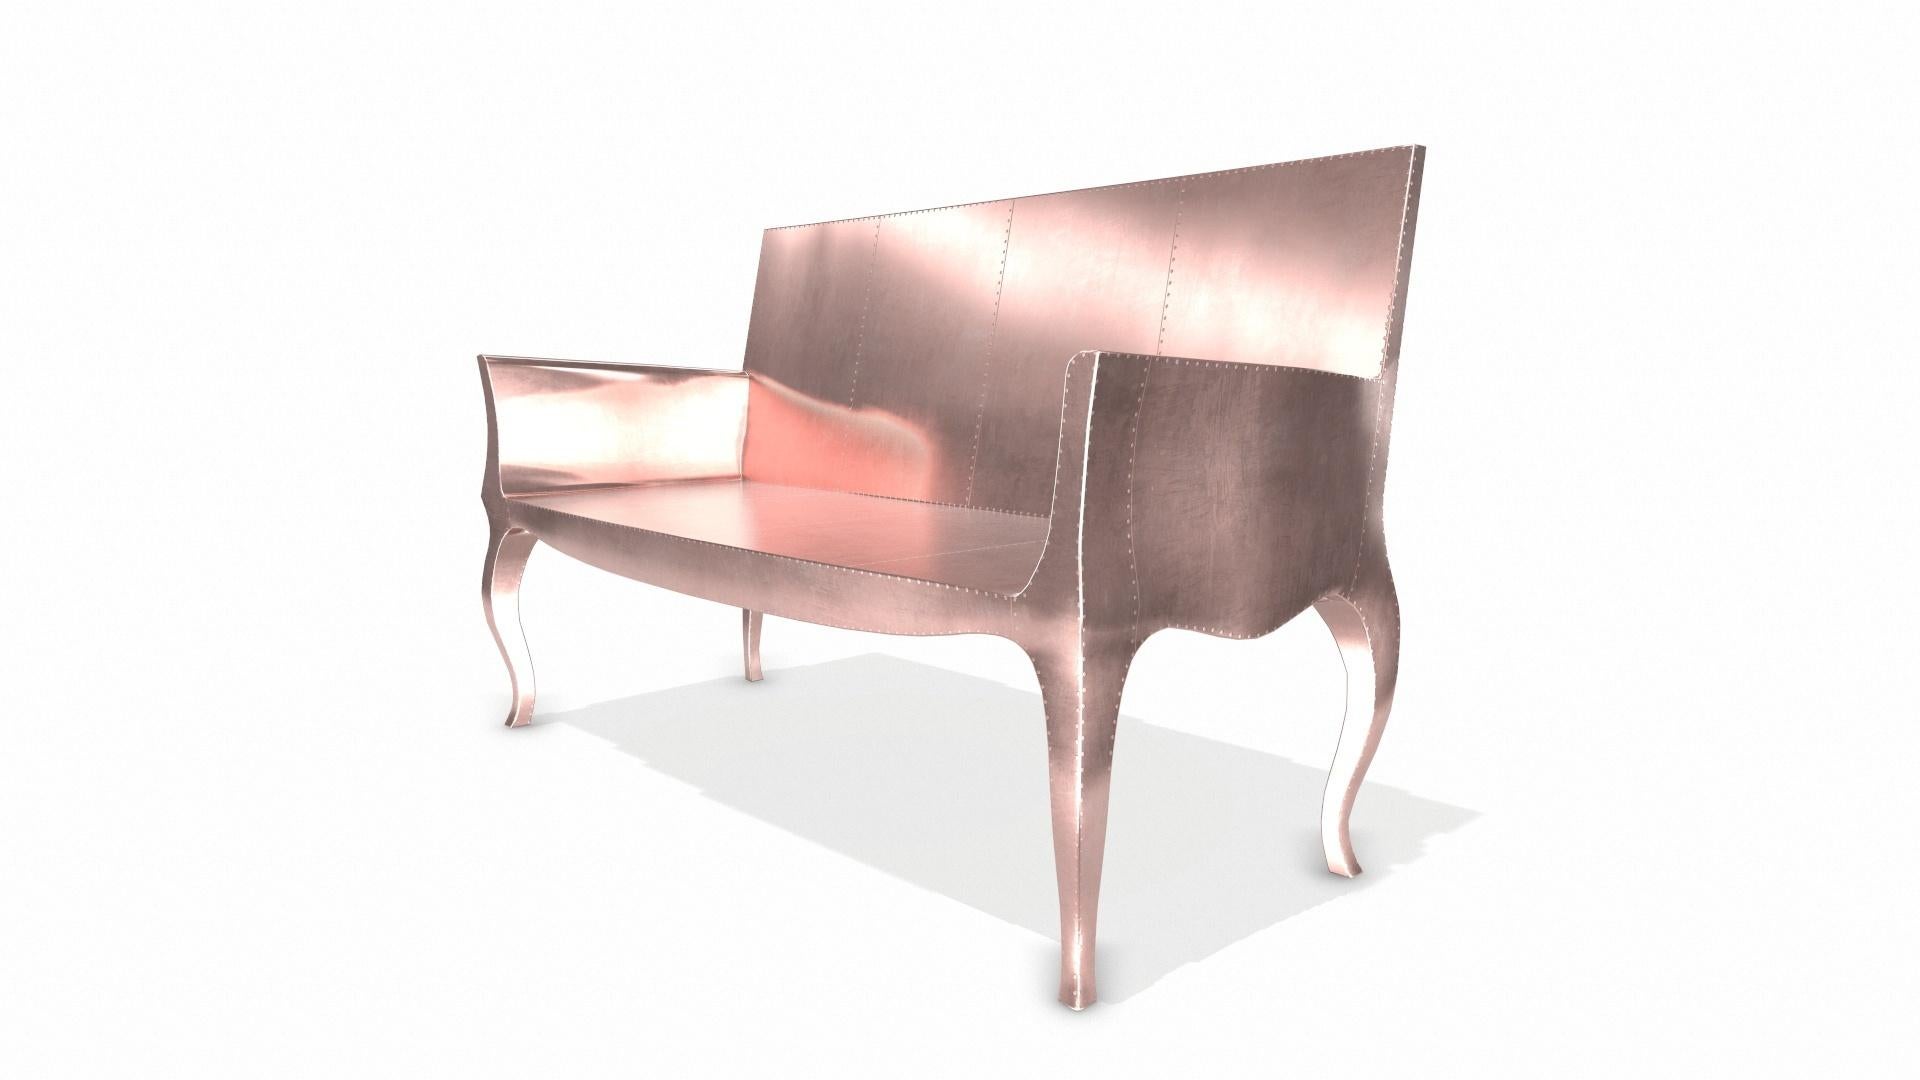 Hand-Crafted Louise Settee Art Deco Living Room Sets in Smooth Copper by Paul Mathieu  For Sale